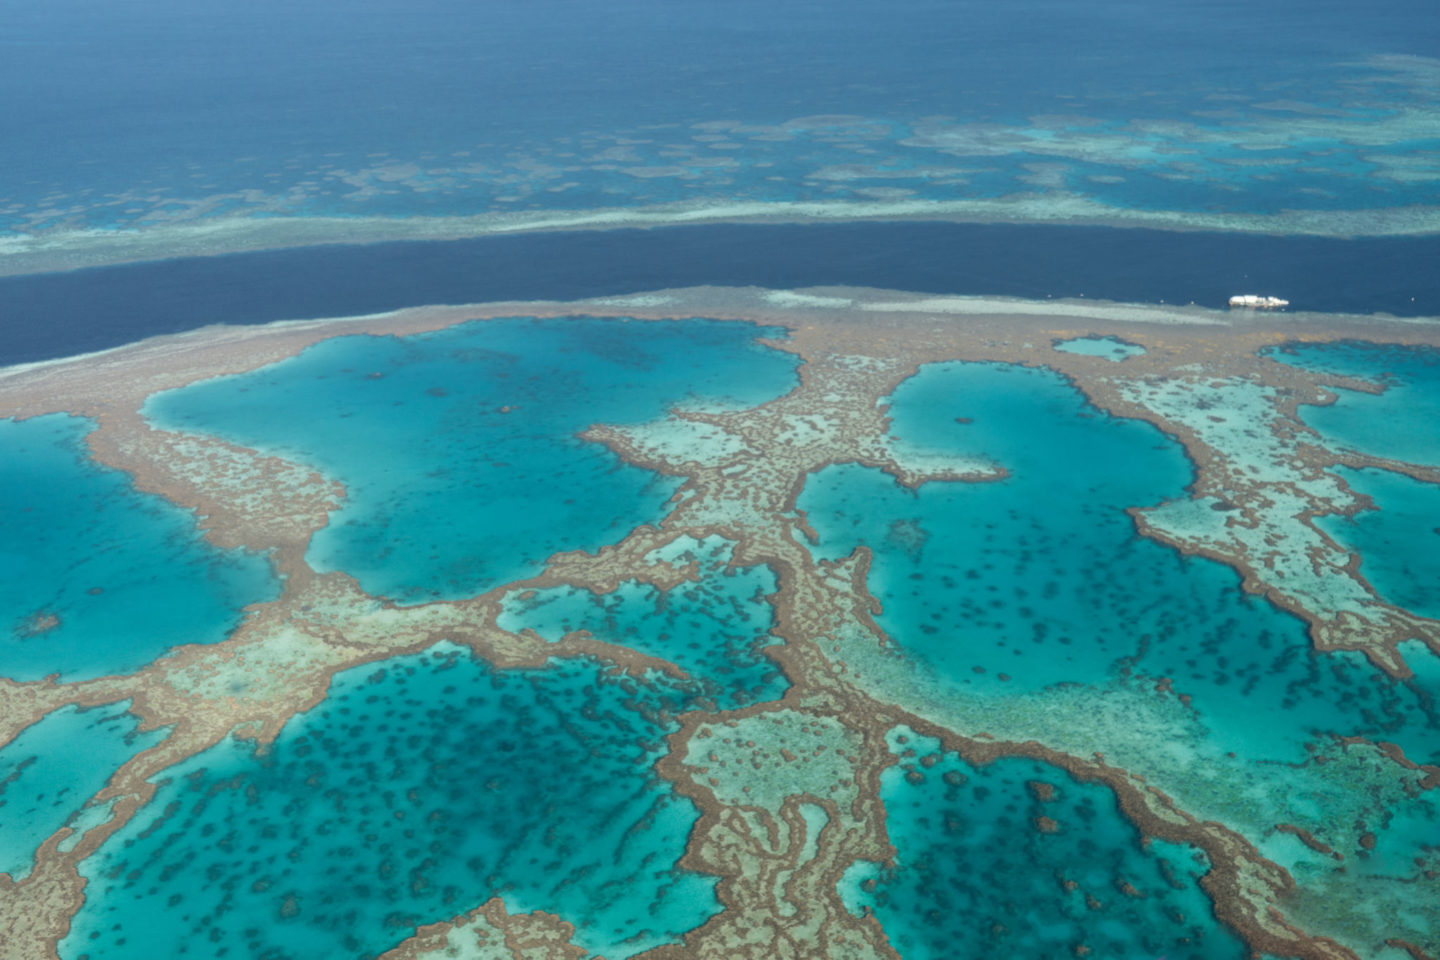 Flying and landing on the Great Barrier Reef and Whitsunday Islands